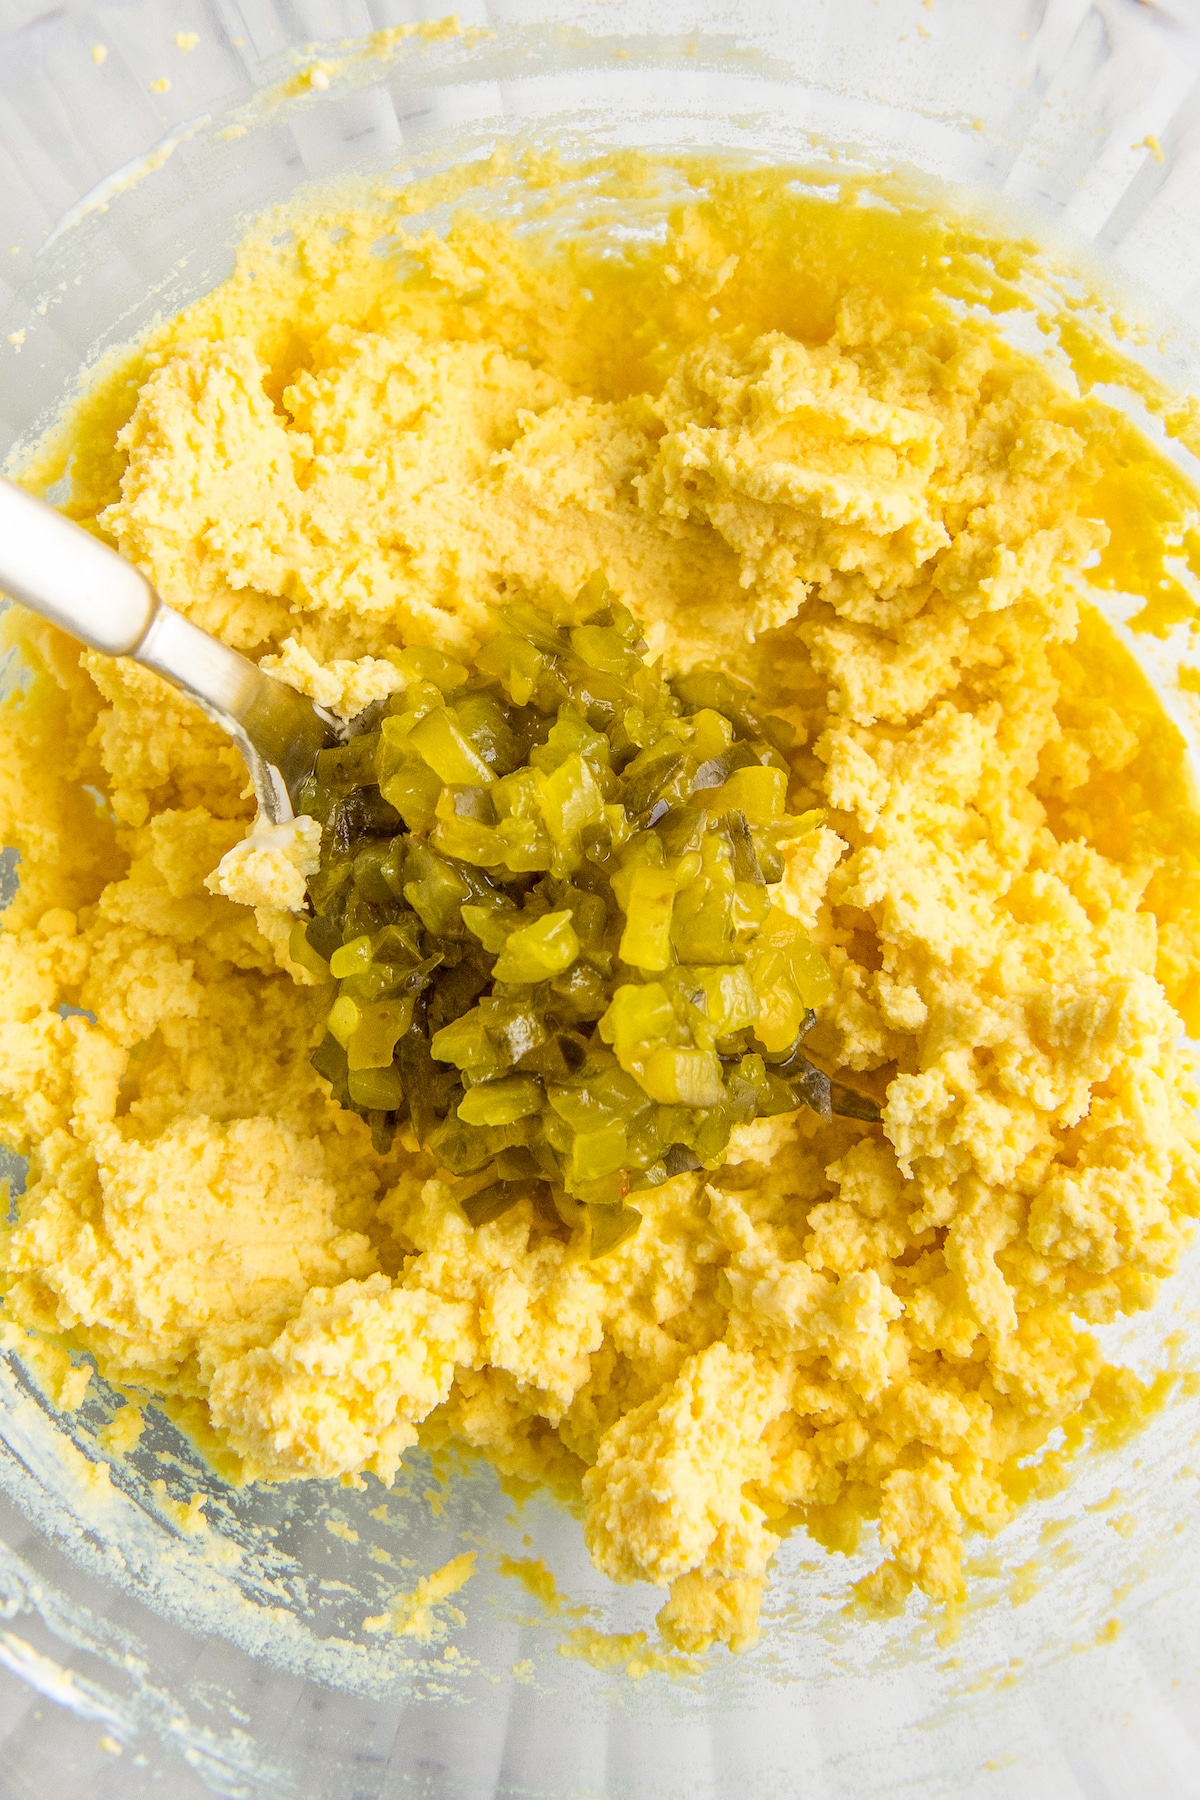 Relish being added to a bowl of mashed egg yolks.